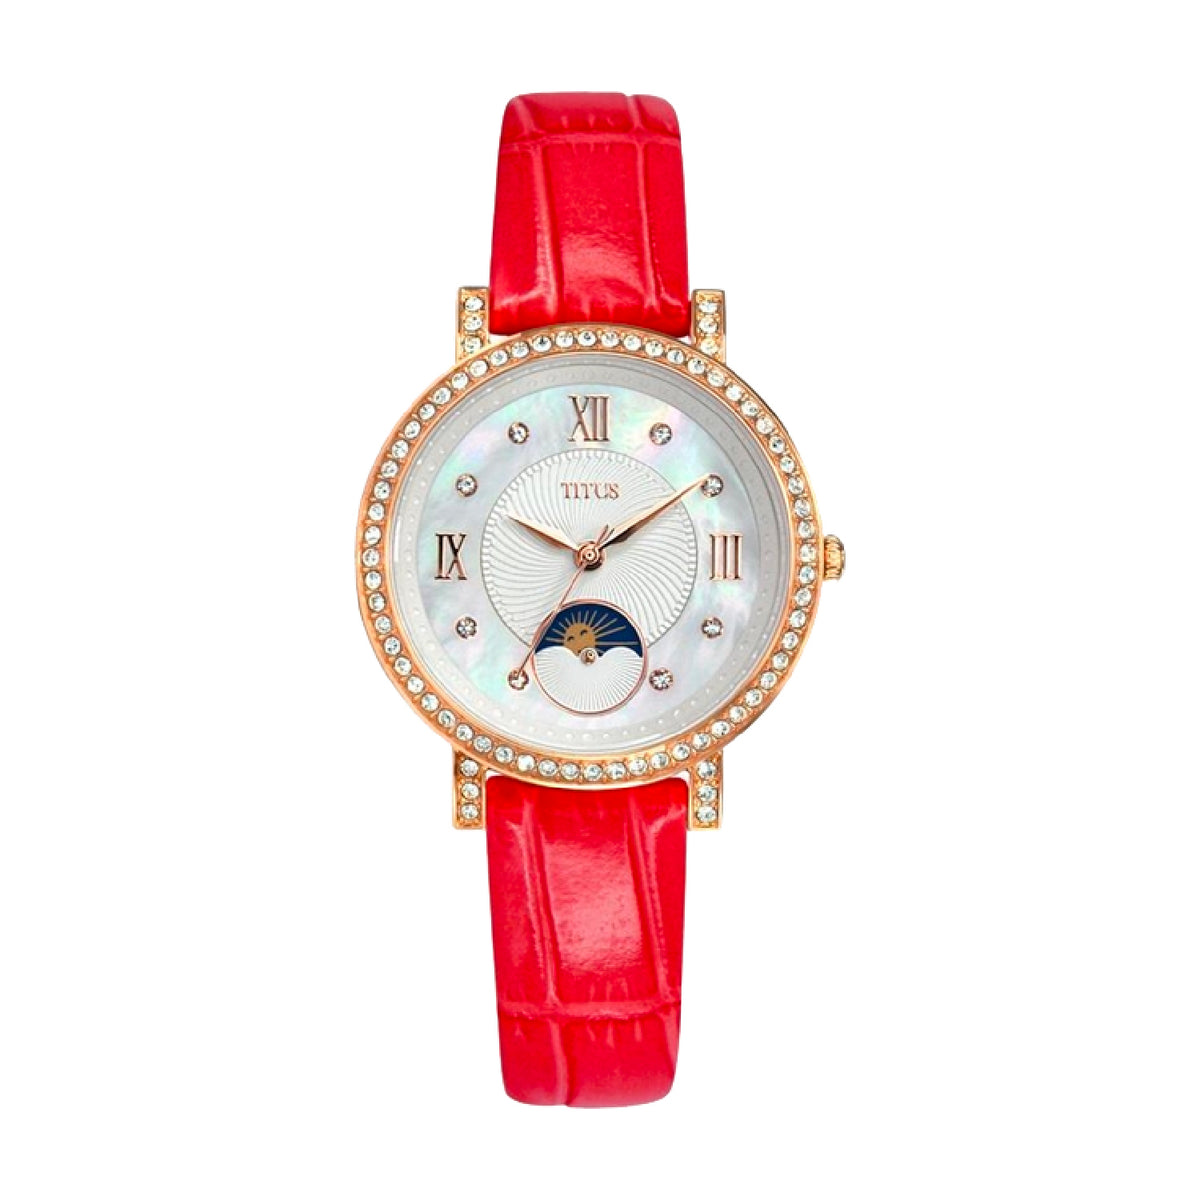 Chandelier 3 Hands with Day Night Indicator Quartz Leather Women Watch W06-03261-004